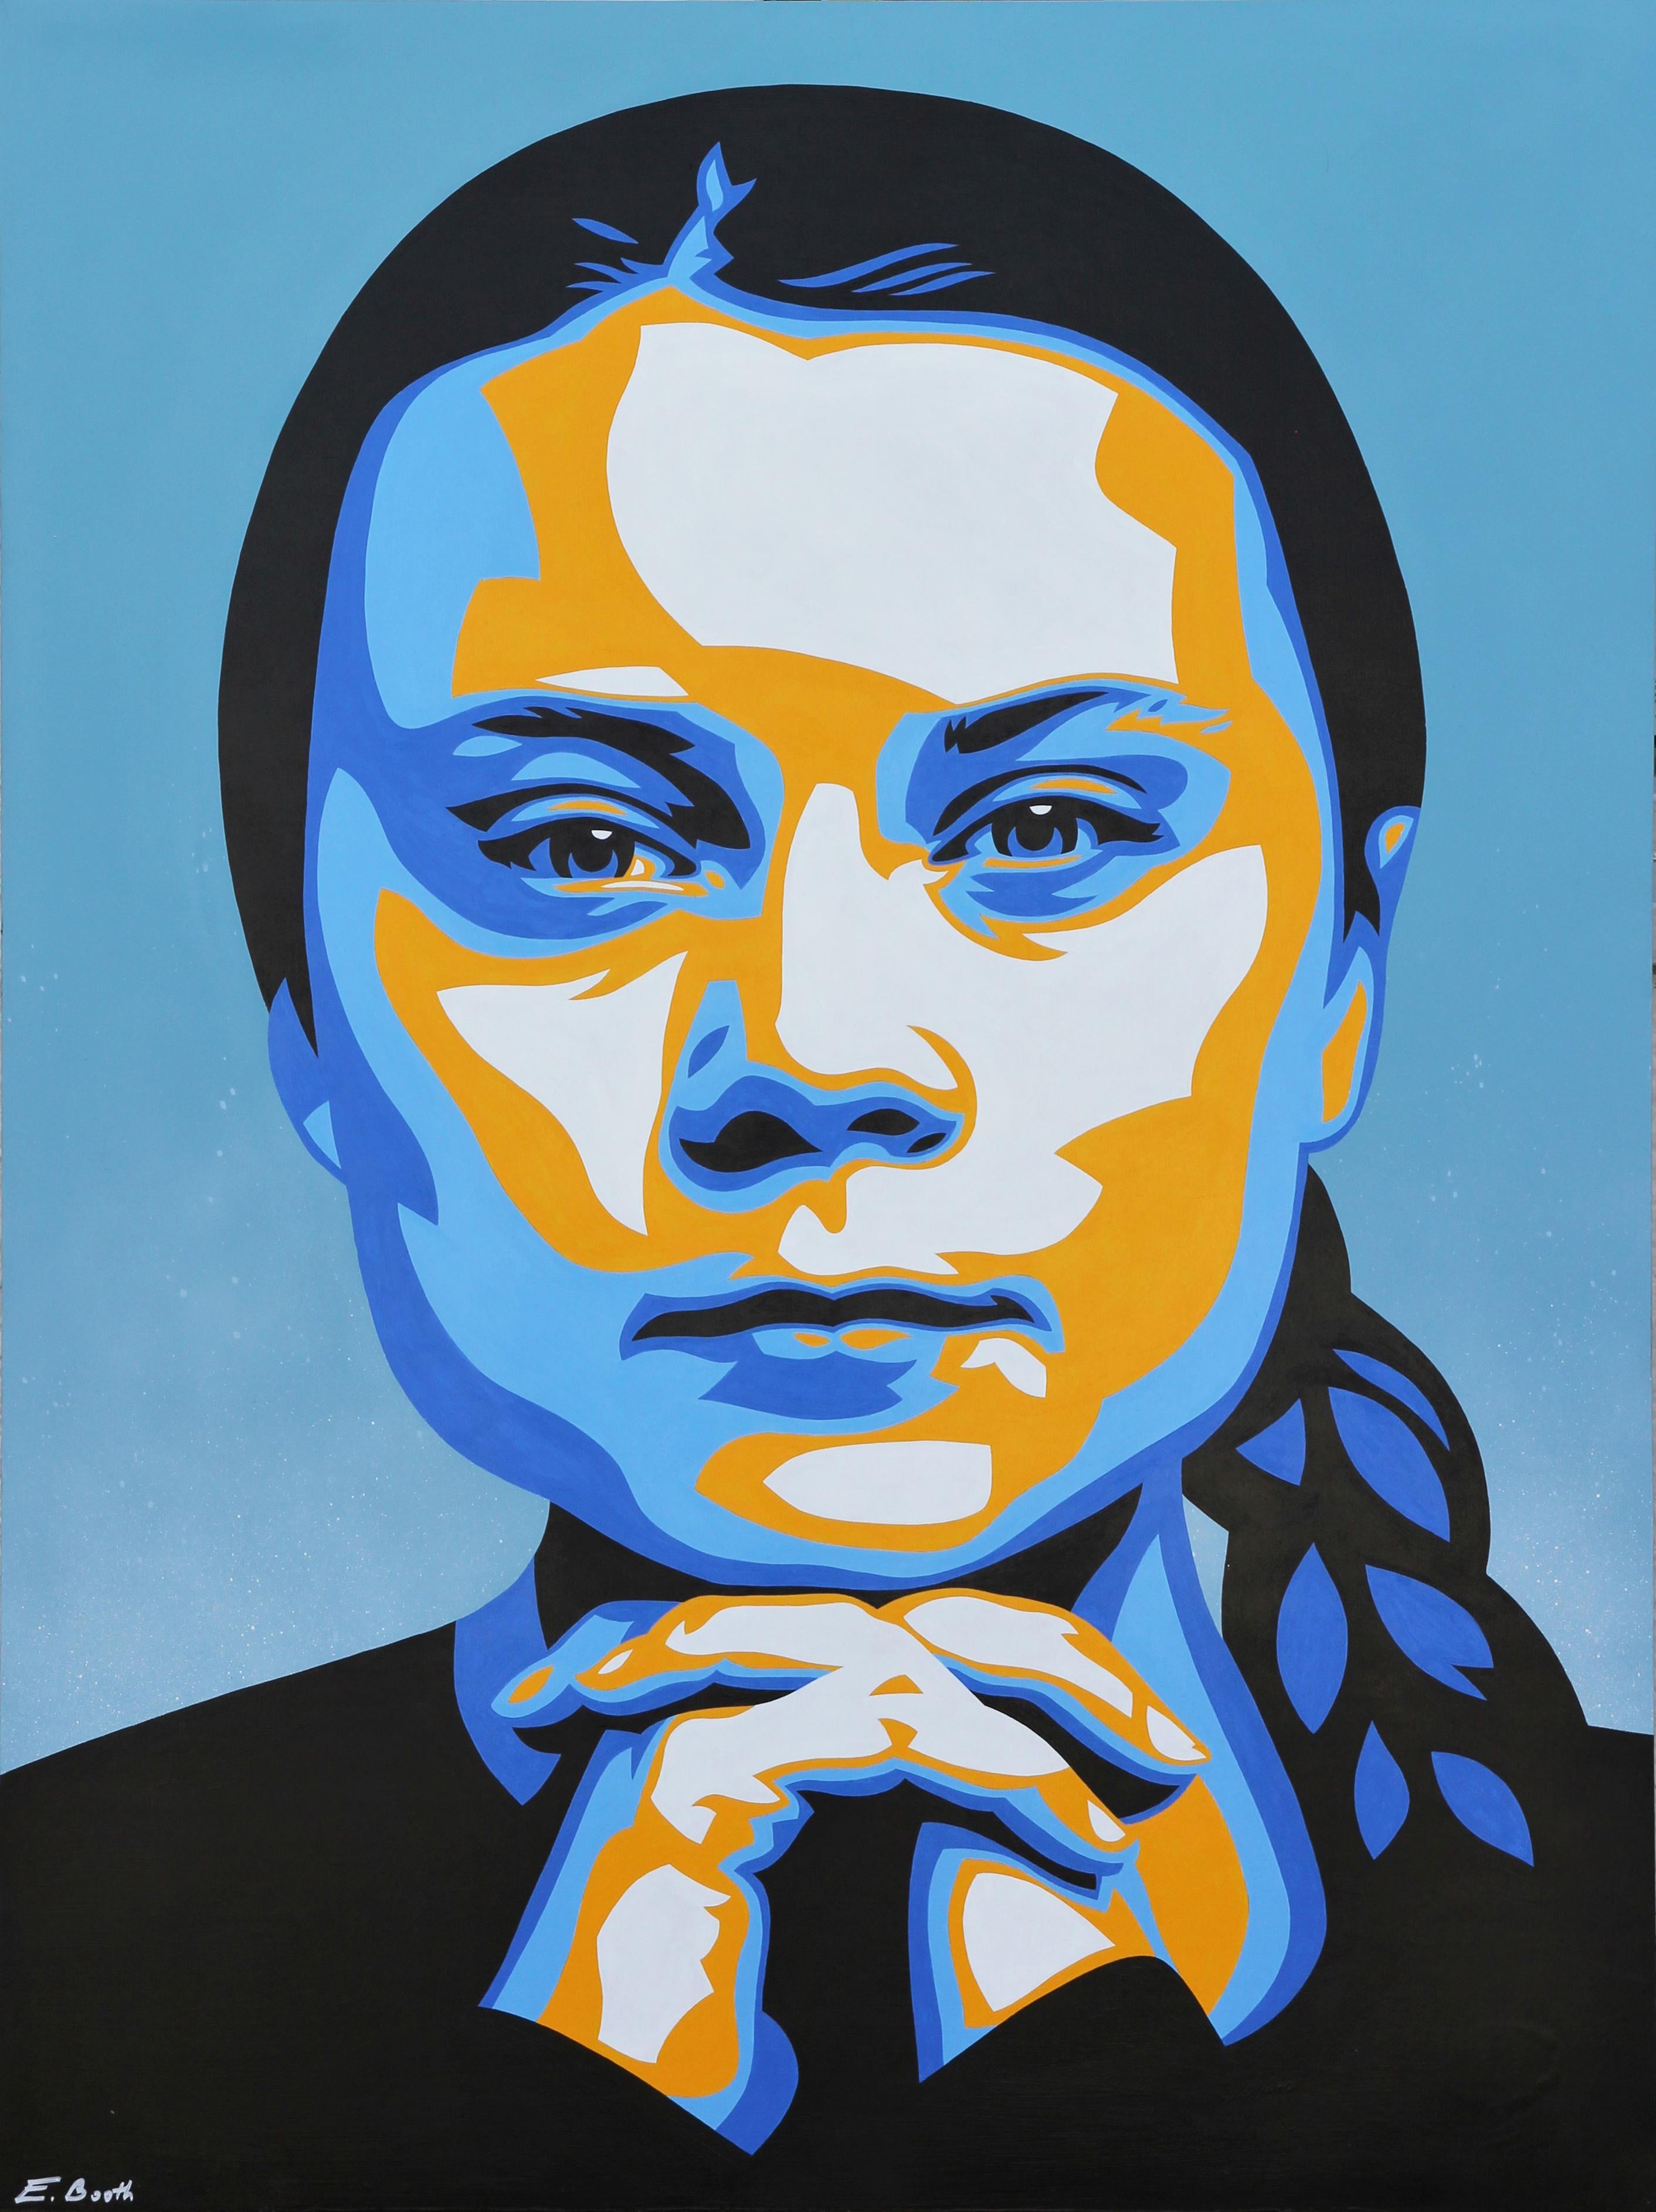 Ed Booth Portrait Painting - Greta Thunberg “Greta” Blue, Yellow, and Black Abstract Contemporary Portrait